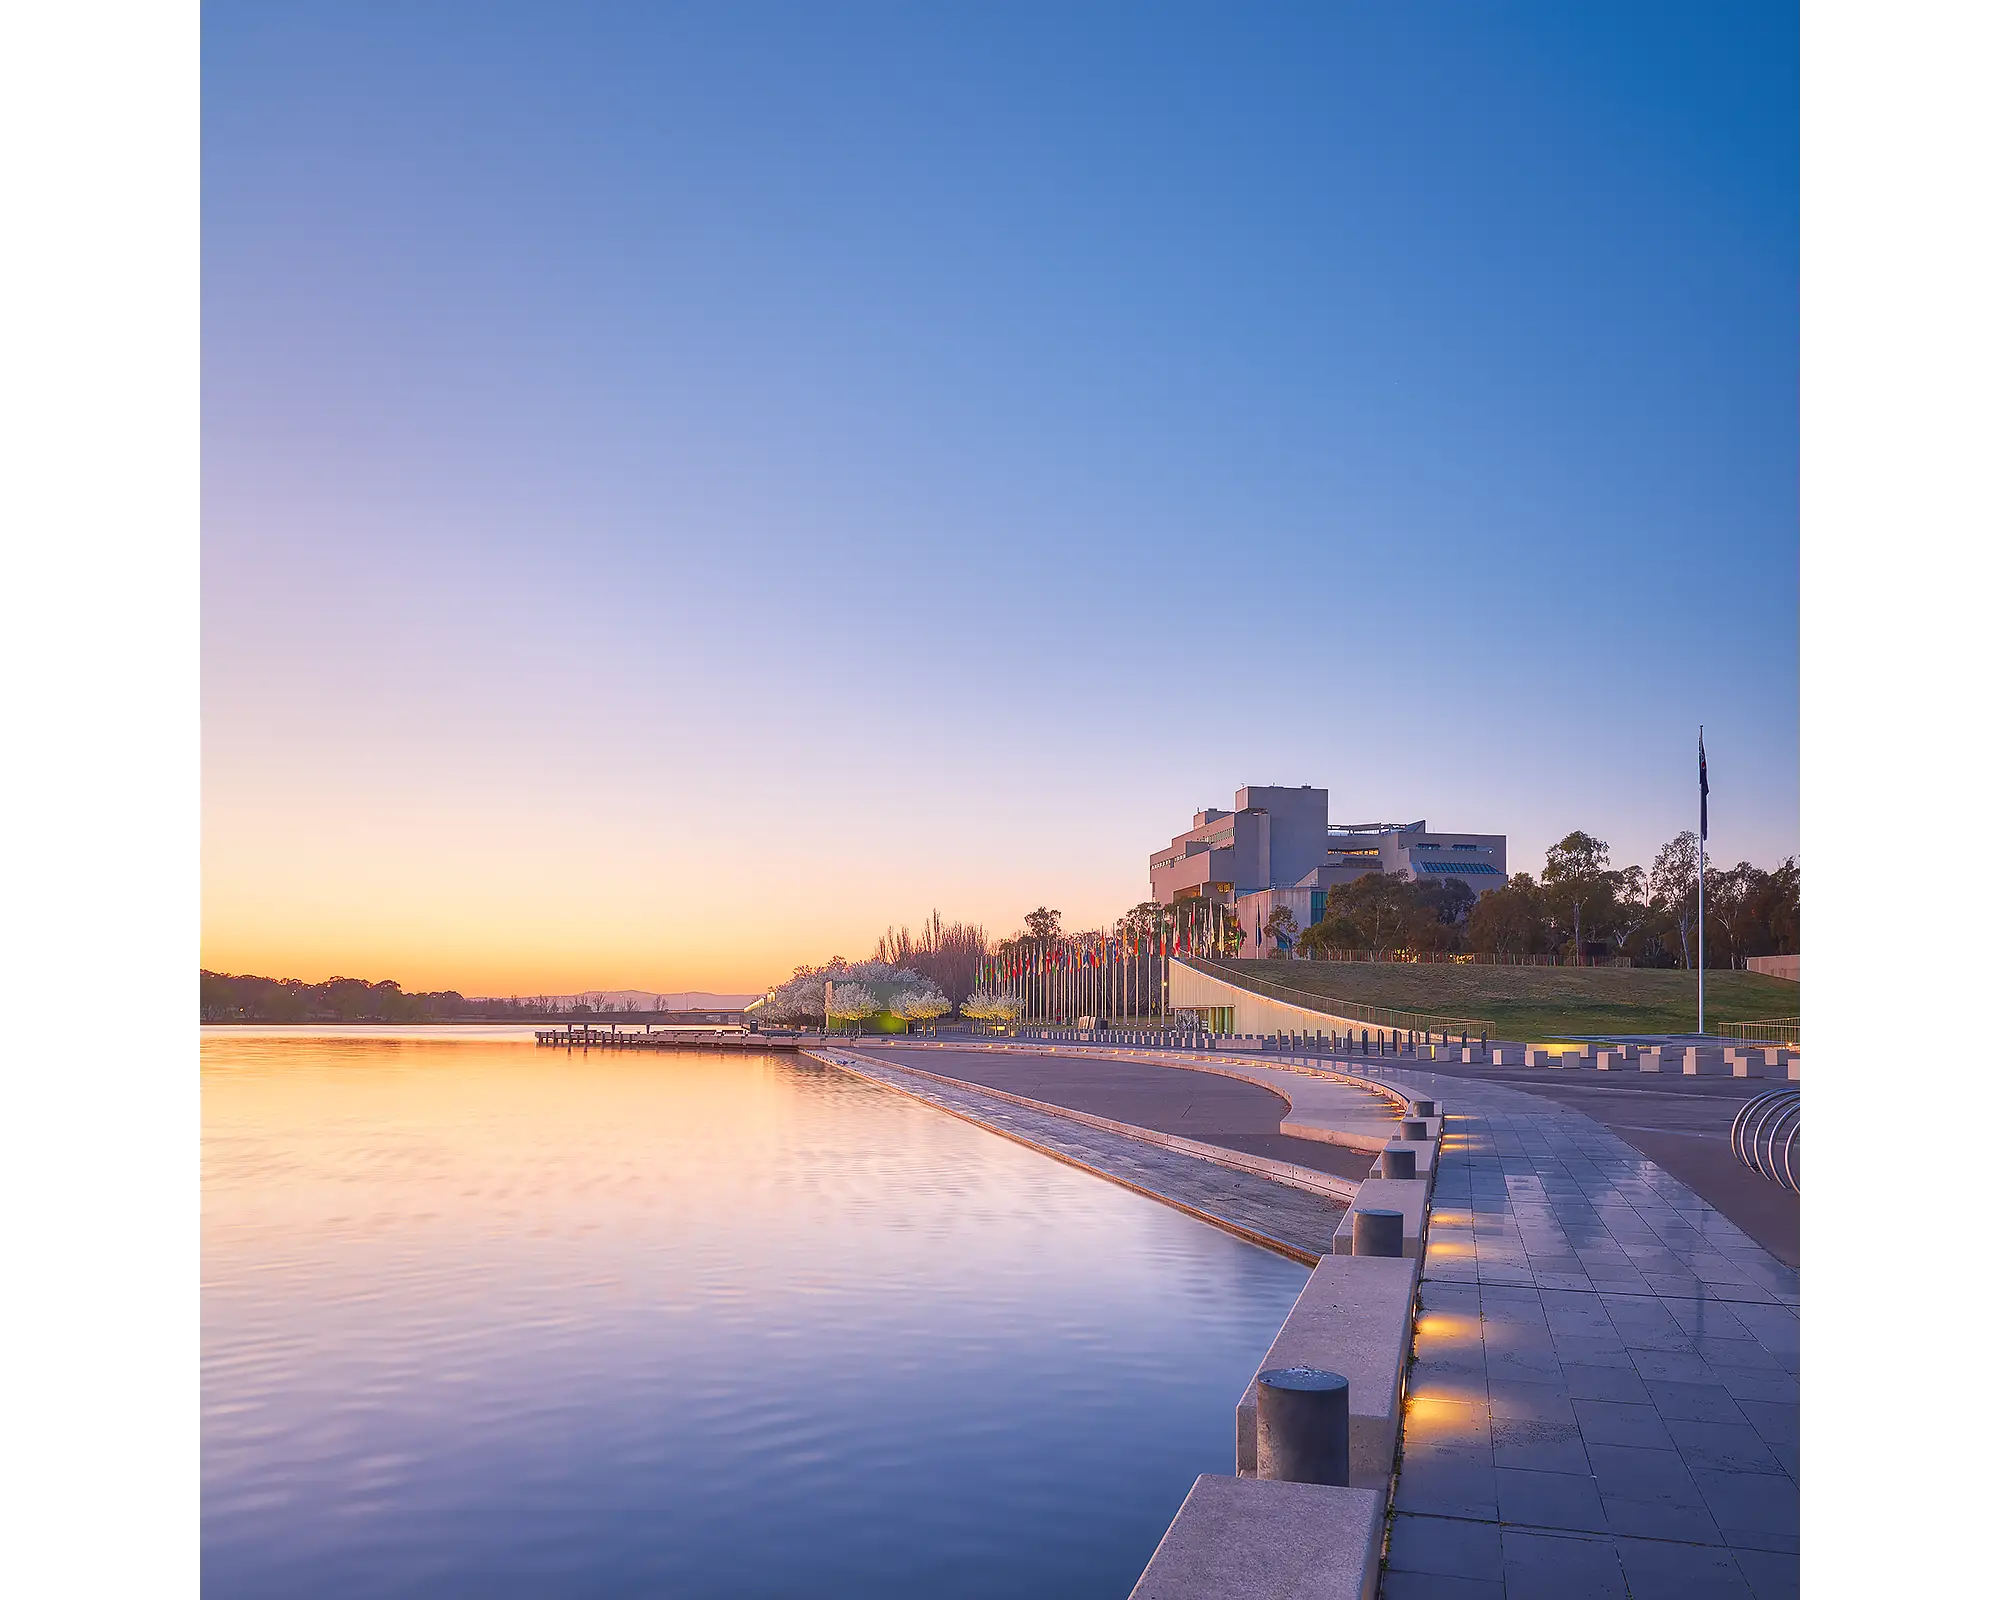 Canberra Awakes - sunrise over Lake Burley Griffin and The HIgh Court, Canberra.